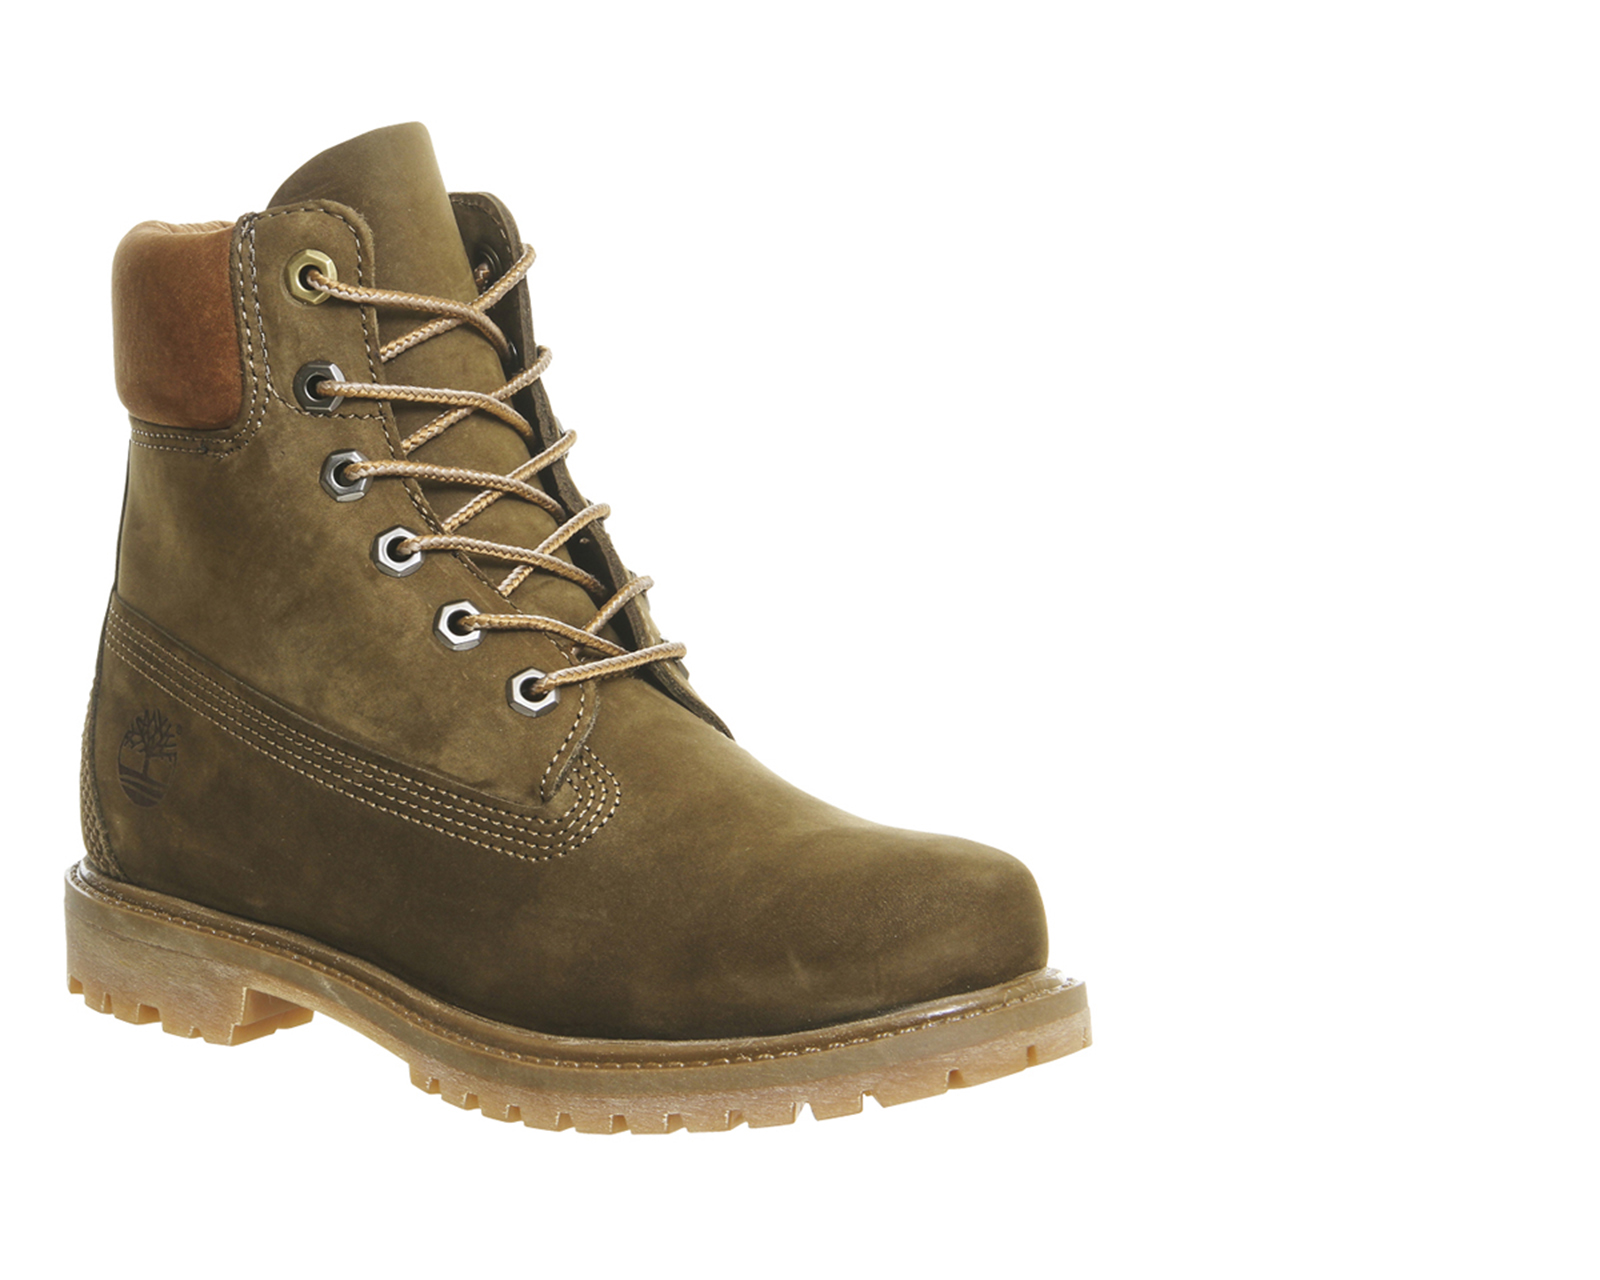 timberland olive boots